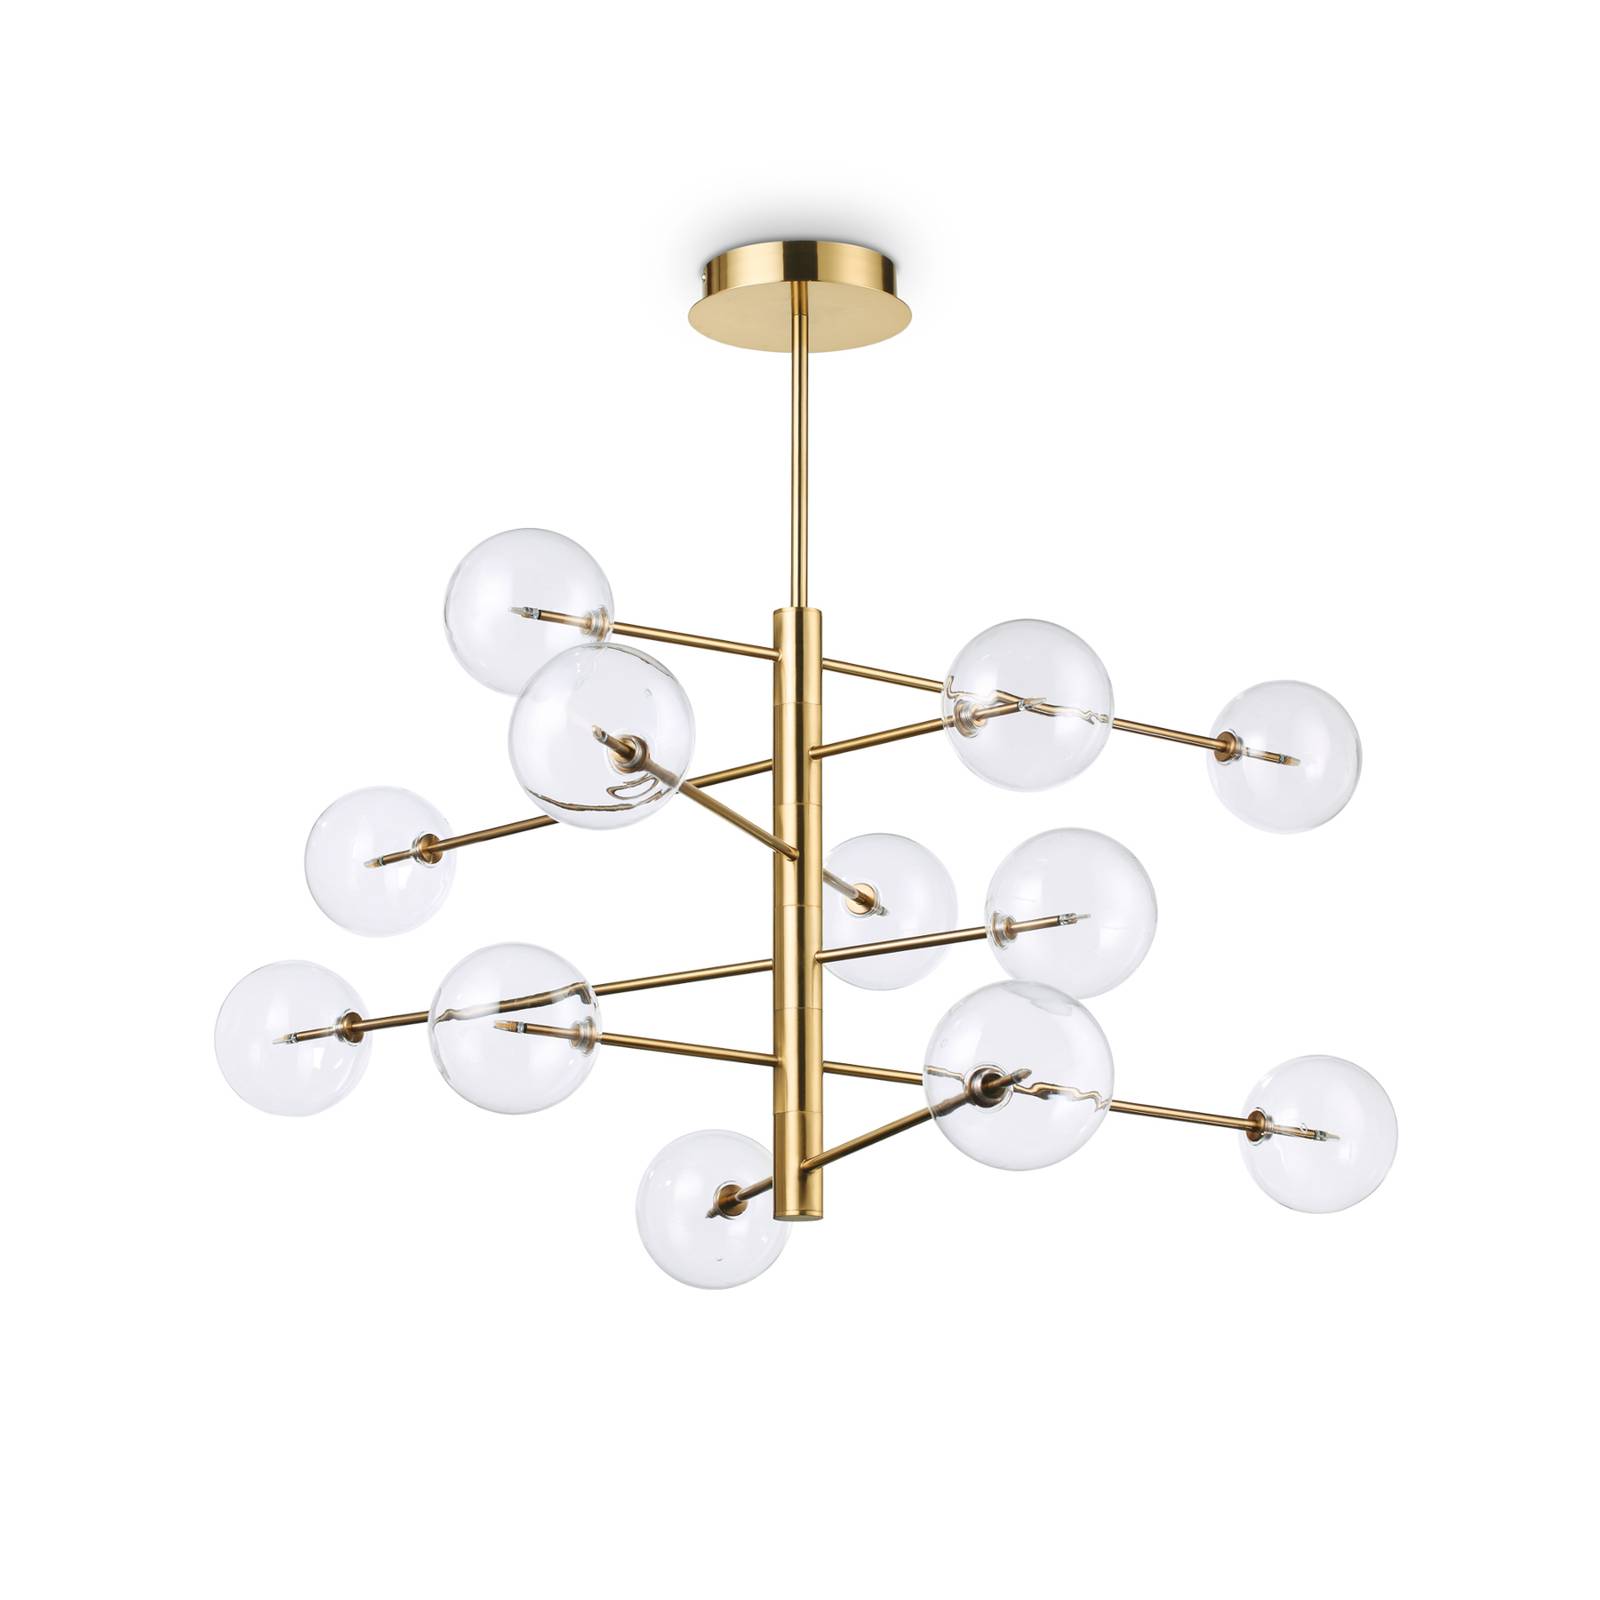 Photos - Chandelier / Lamp Ideal Lux Ideallux  hanging light Equinoxe 12-bulb brass-coloured clear gla 